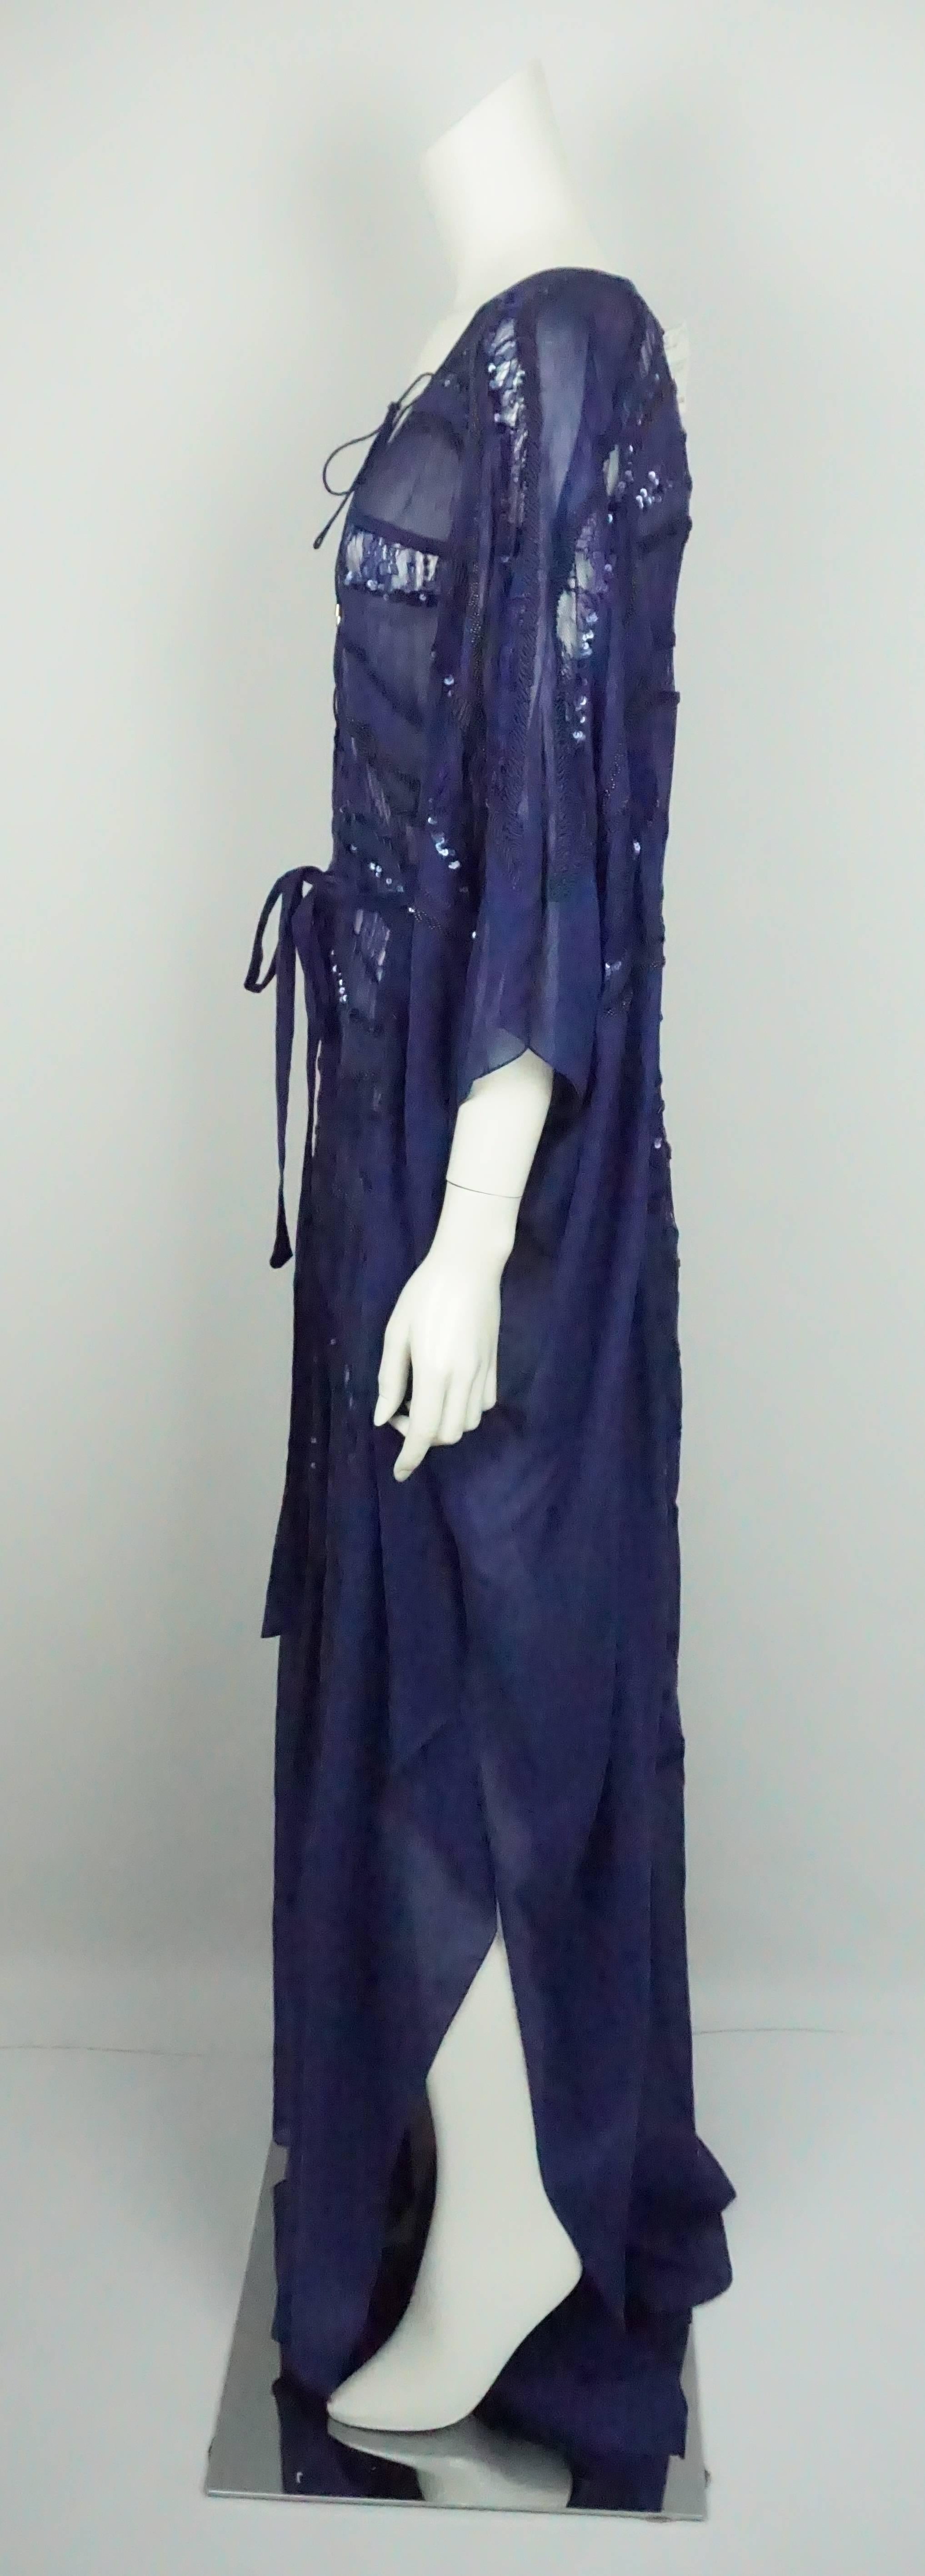 Roberto Cavalli Blue Cotton/ Silk Beaded Caftan - 38  This wonderful summer piece is in excellent condition. The caftan is completely made of cotton and silk. The caftan is sheer throughout and it contains a striped pattern of different detailing